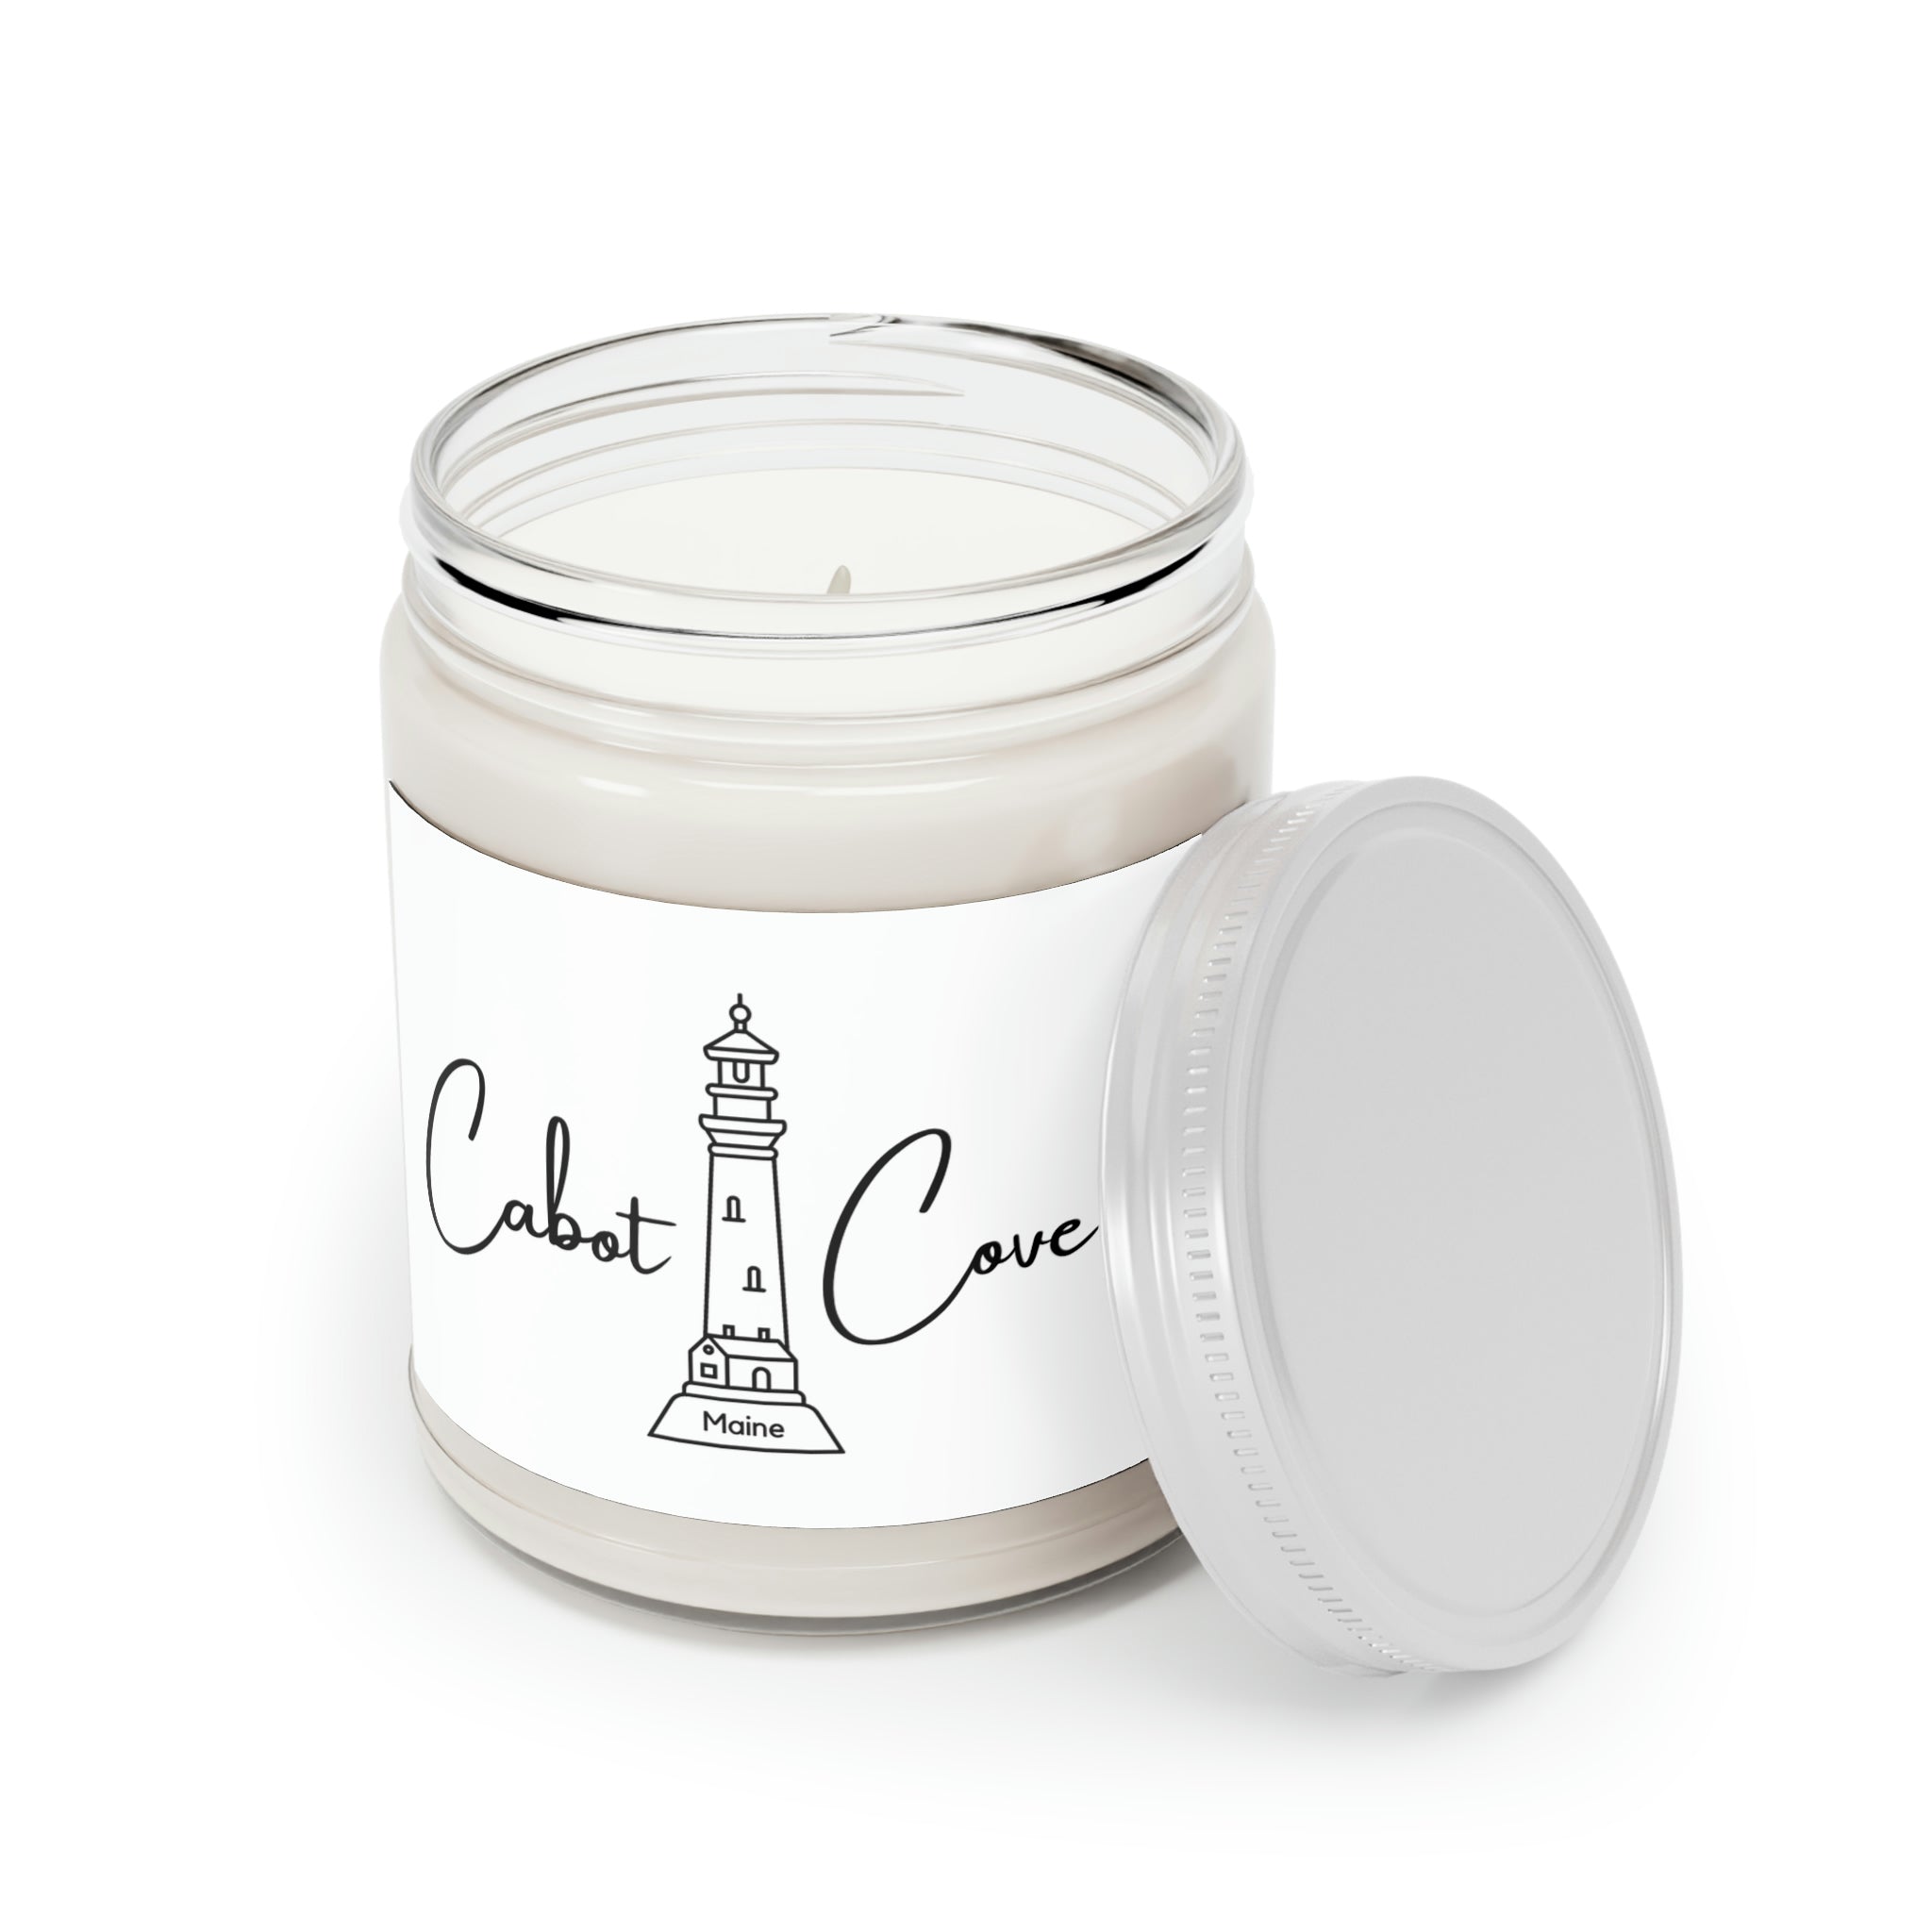 Cabot Cove Soy Candle with open lid 9 oz